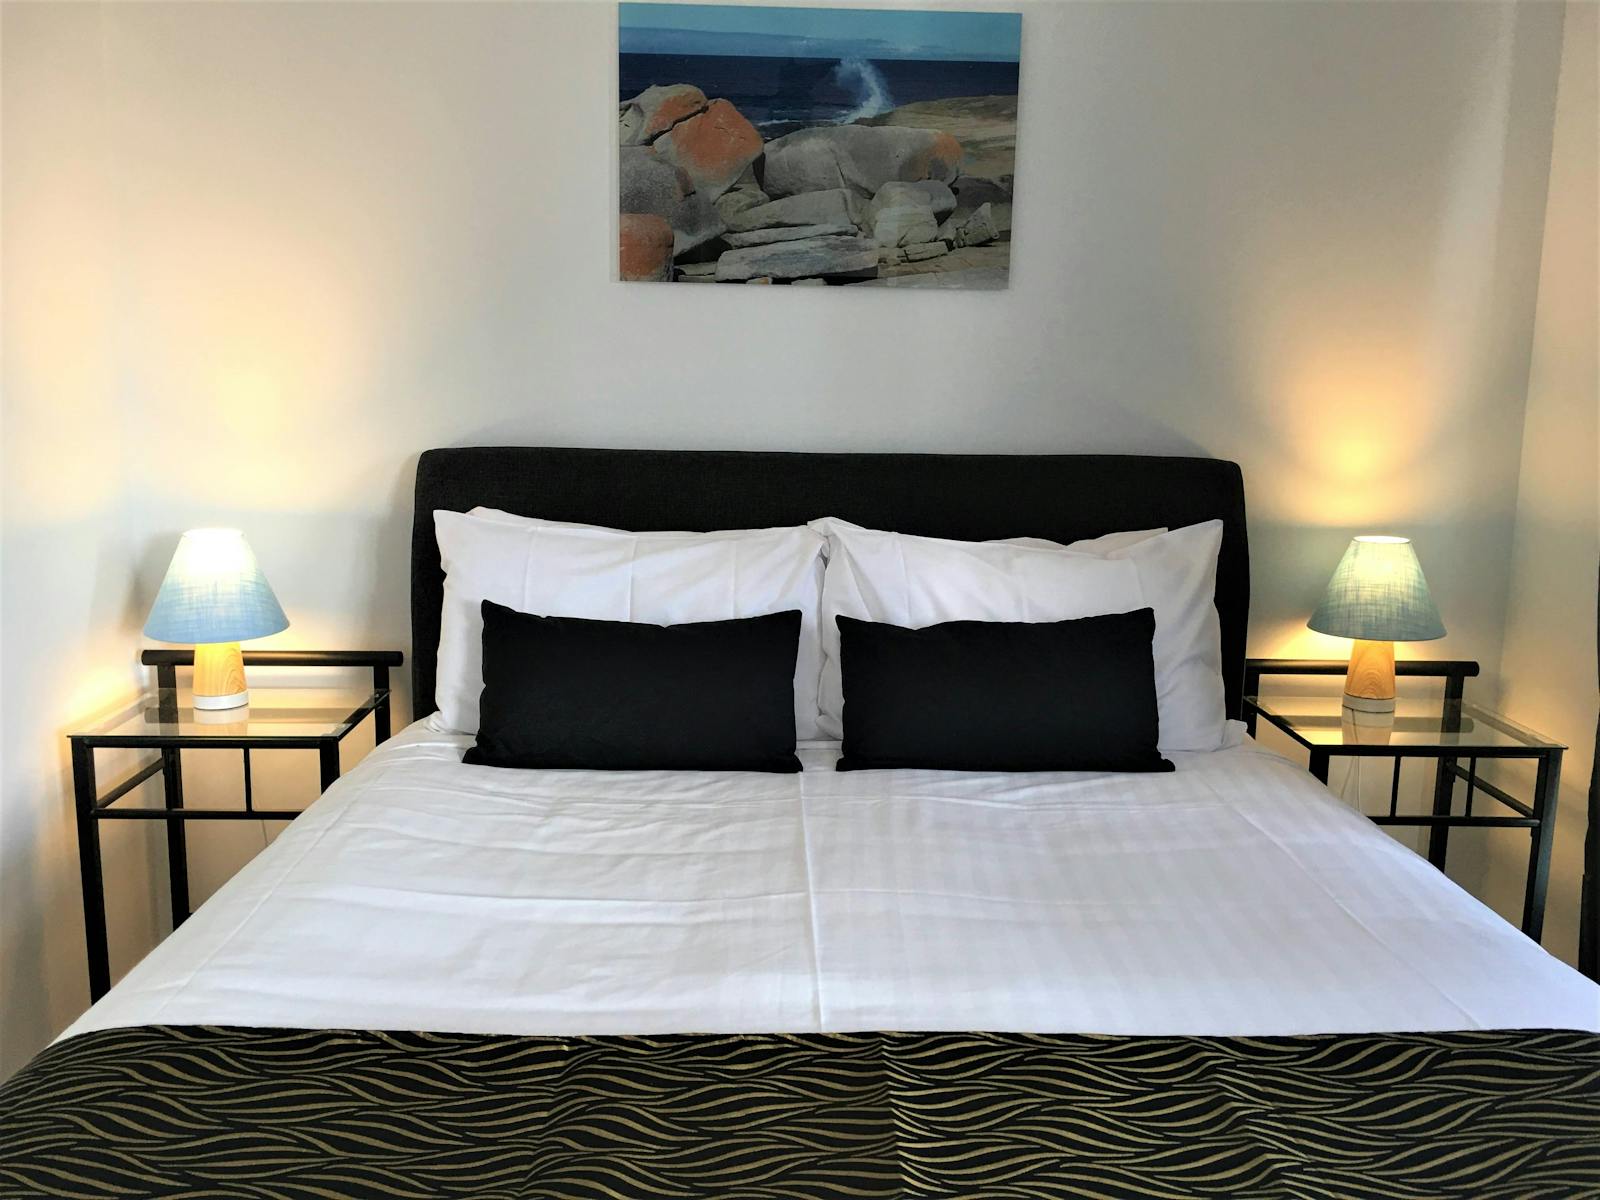 The Banksia Room has a super comfortable queen bed with cosy electric blanket and crisp linen.